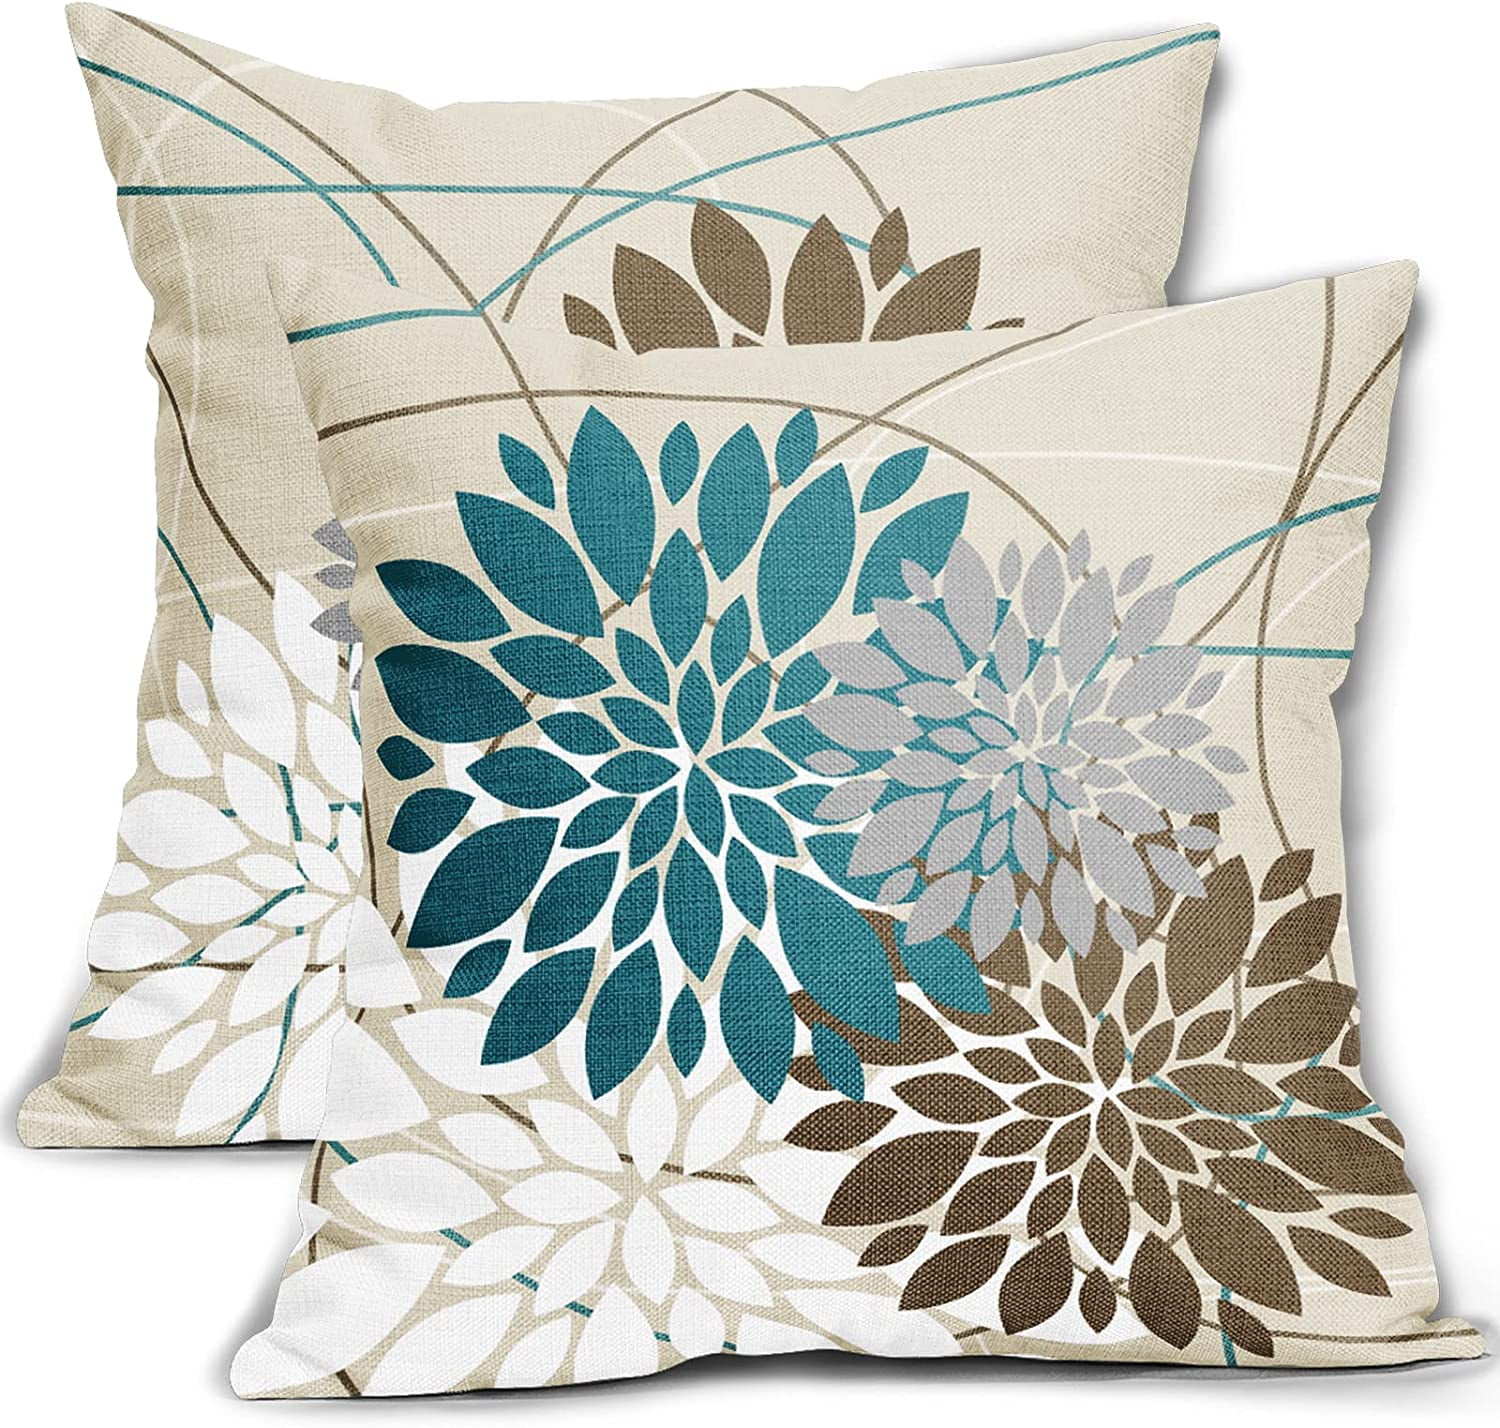 Art Flower Throw Pillow Covers Pack of 2 18x18 Inch (Blue